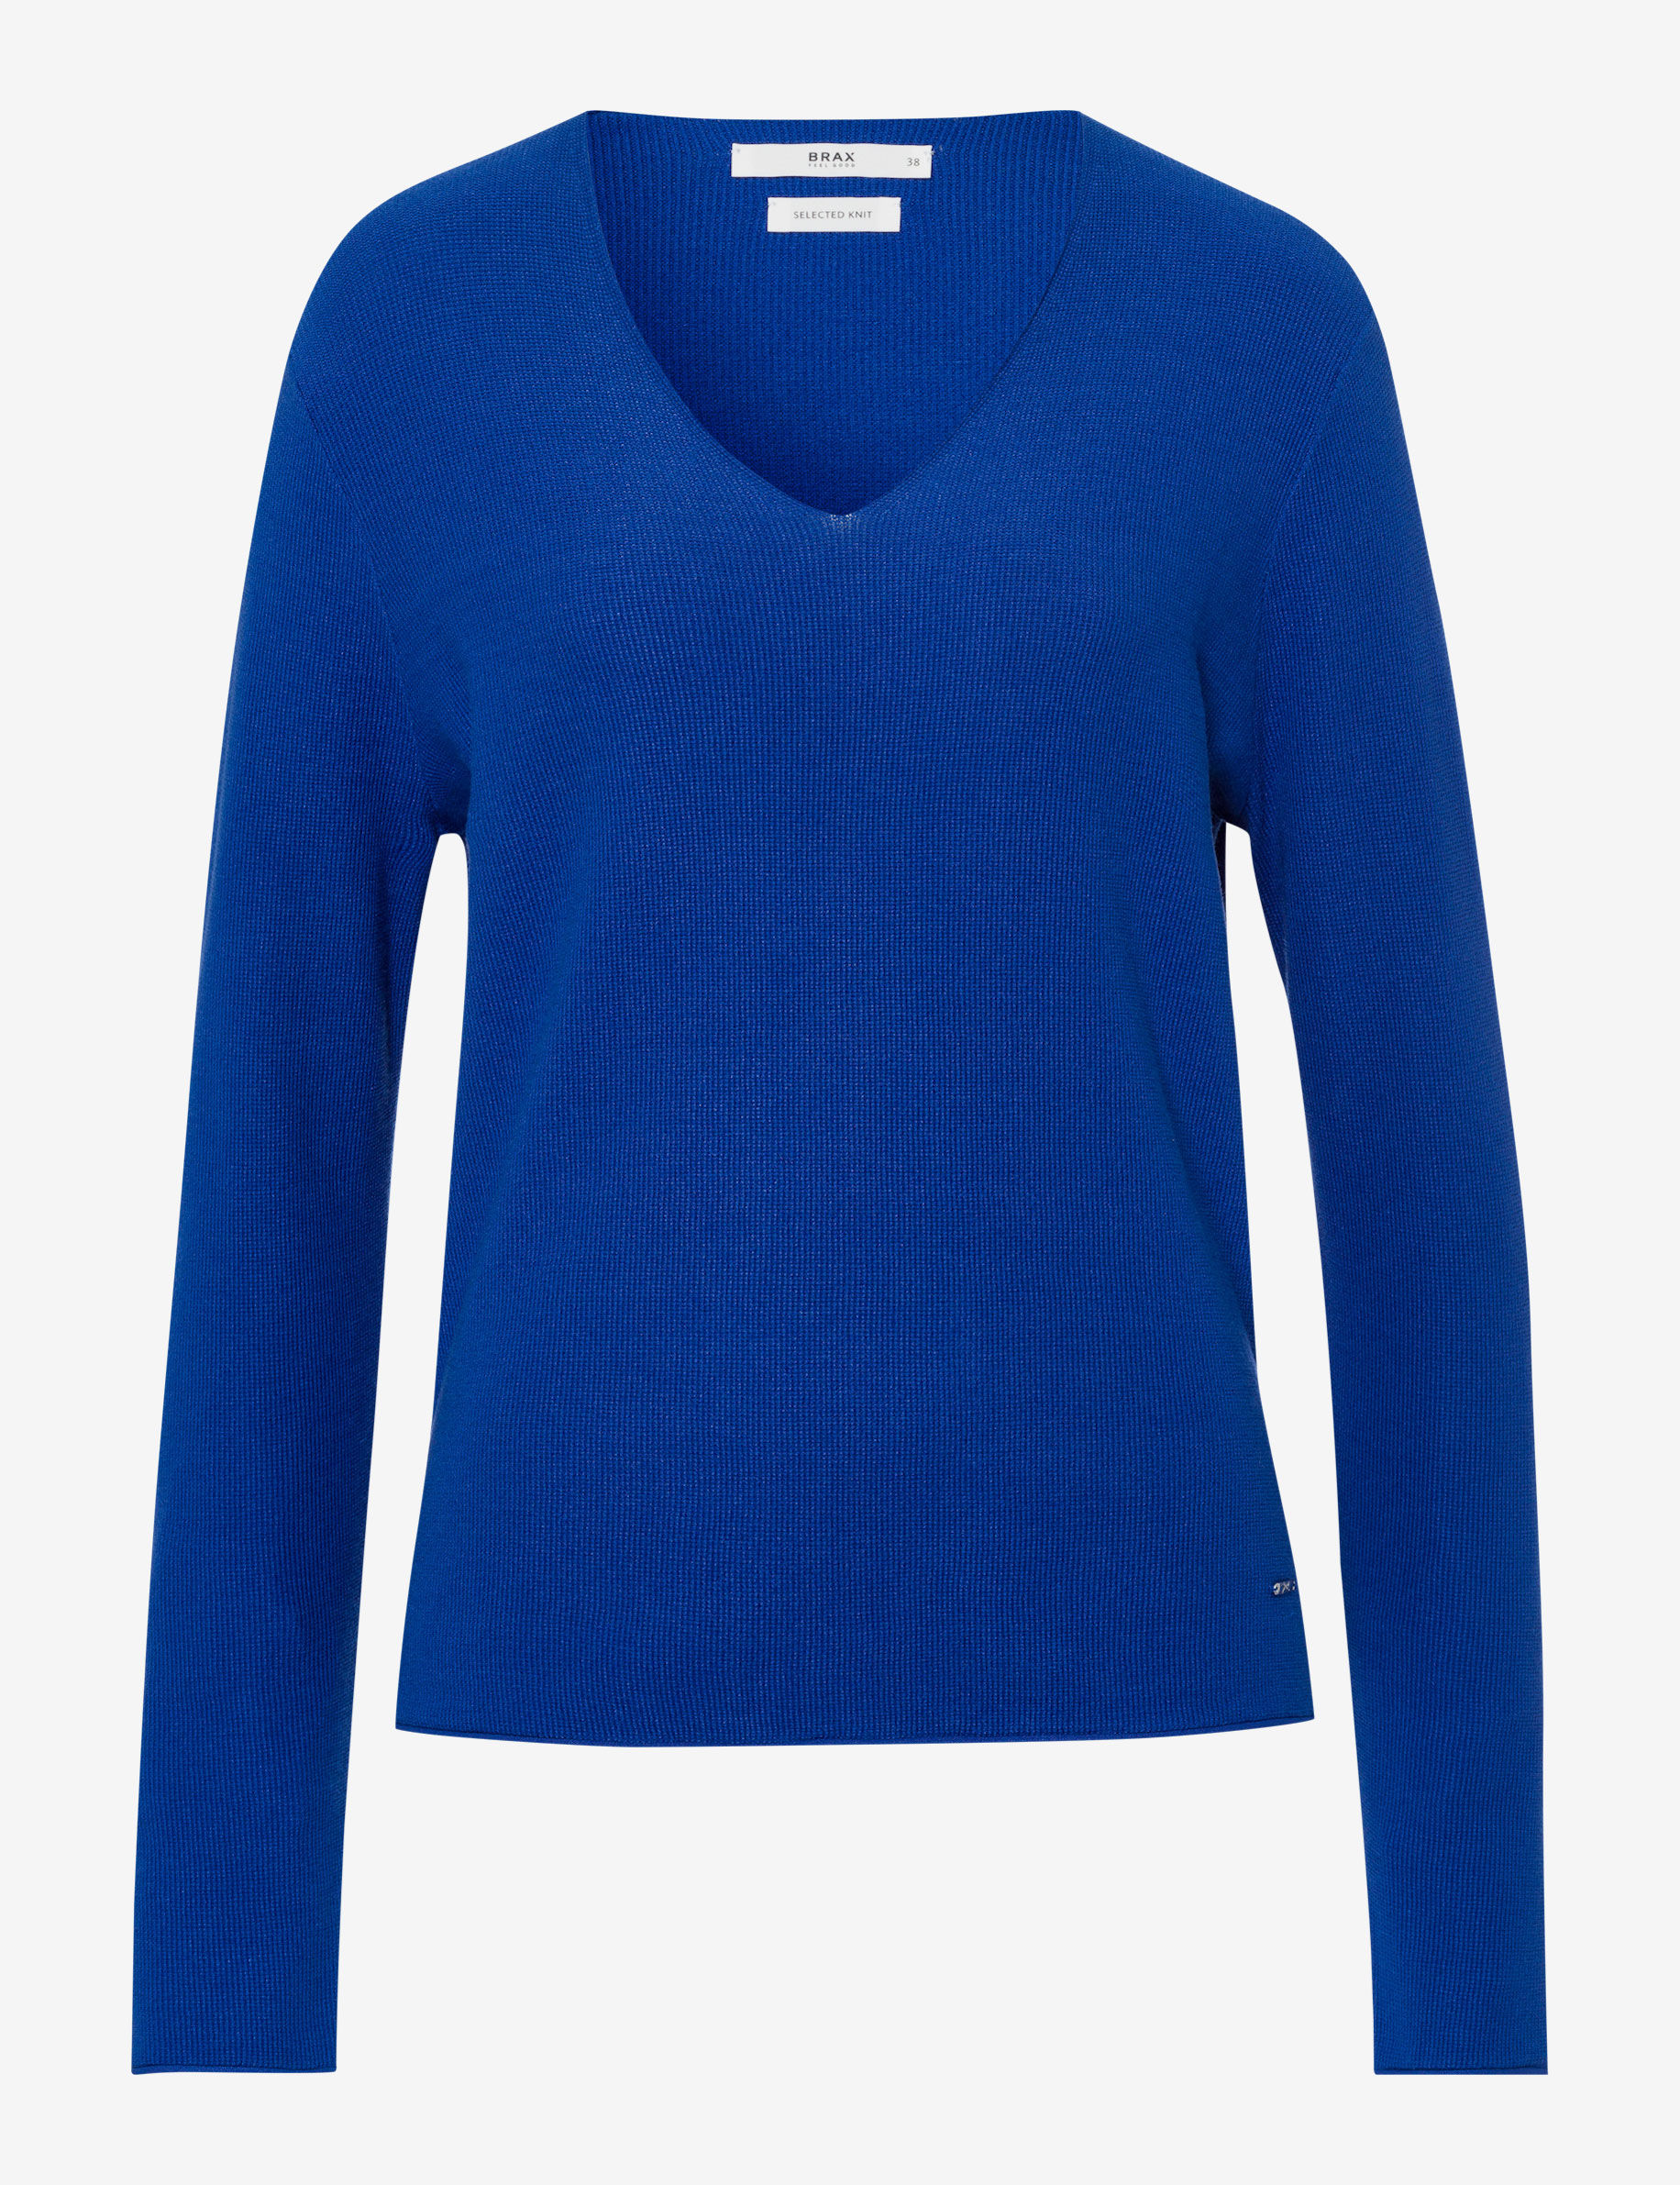 Women Style LESLEY inked blue  Stand-alone front view